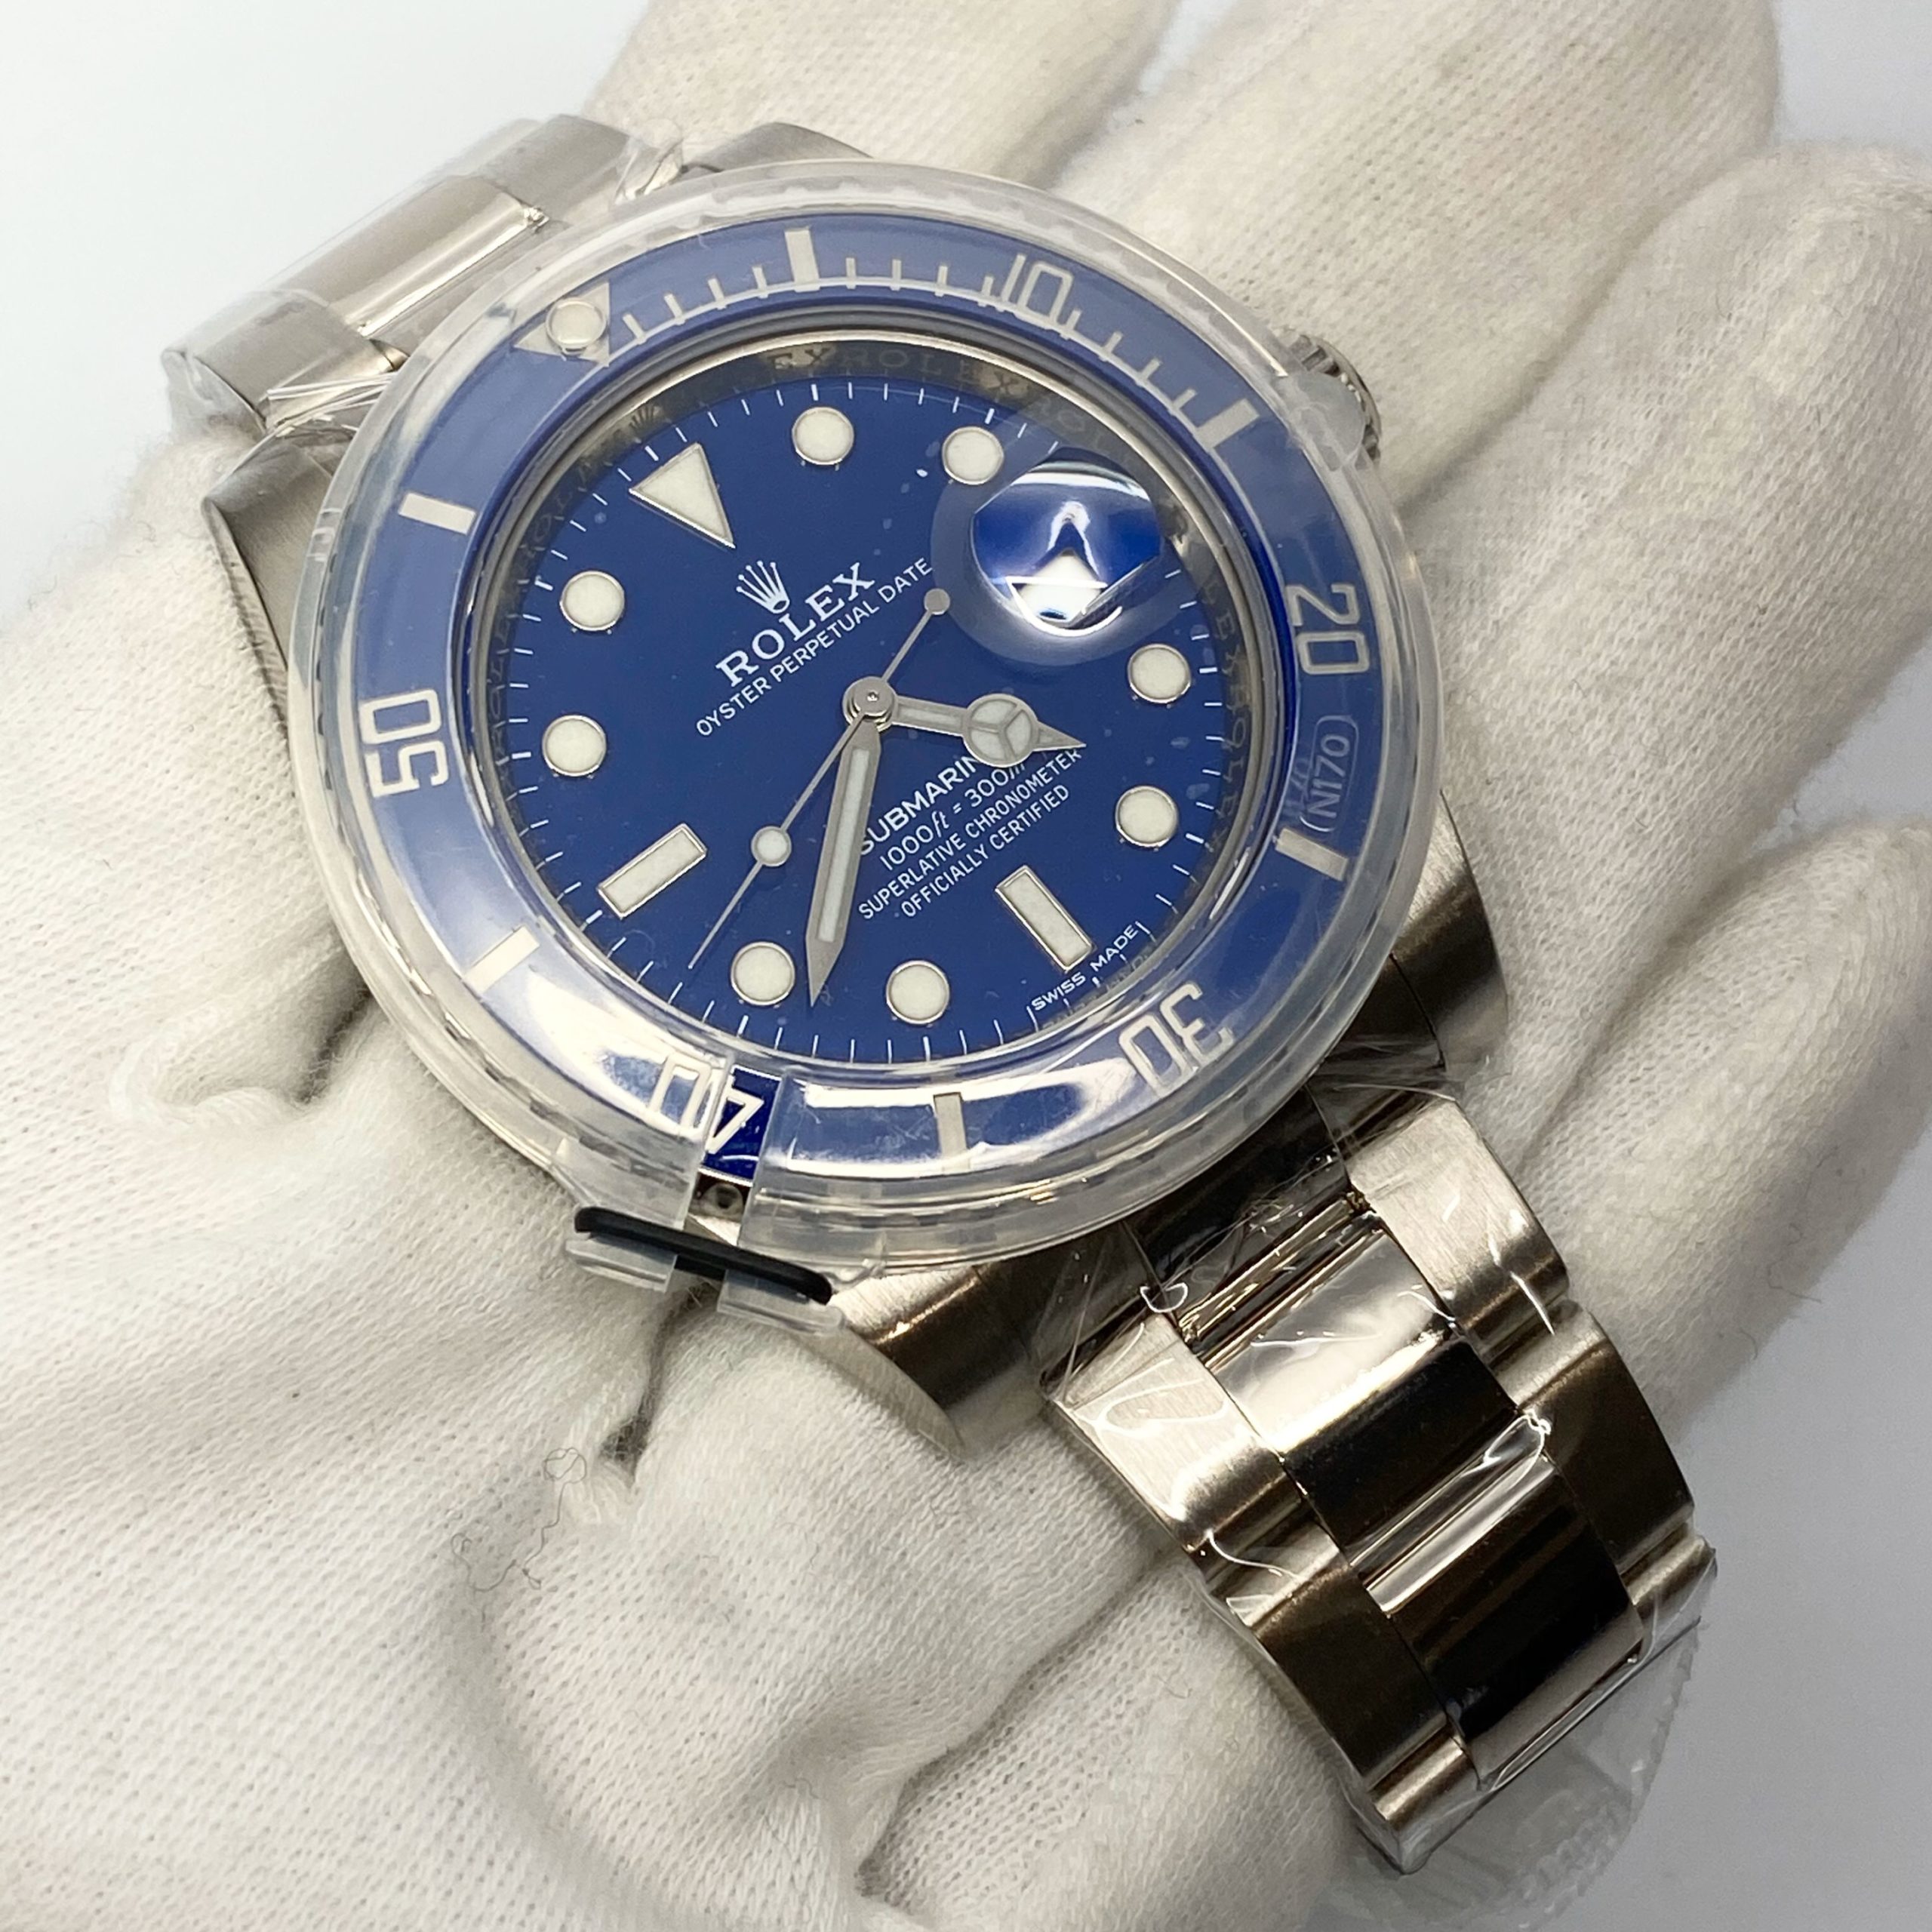 brutalt Profit Delegeret Is The Rolex Smurf A Good Buy Right Now? [REVIEW WITH PRICE]